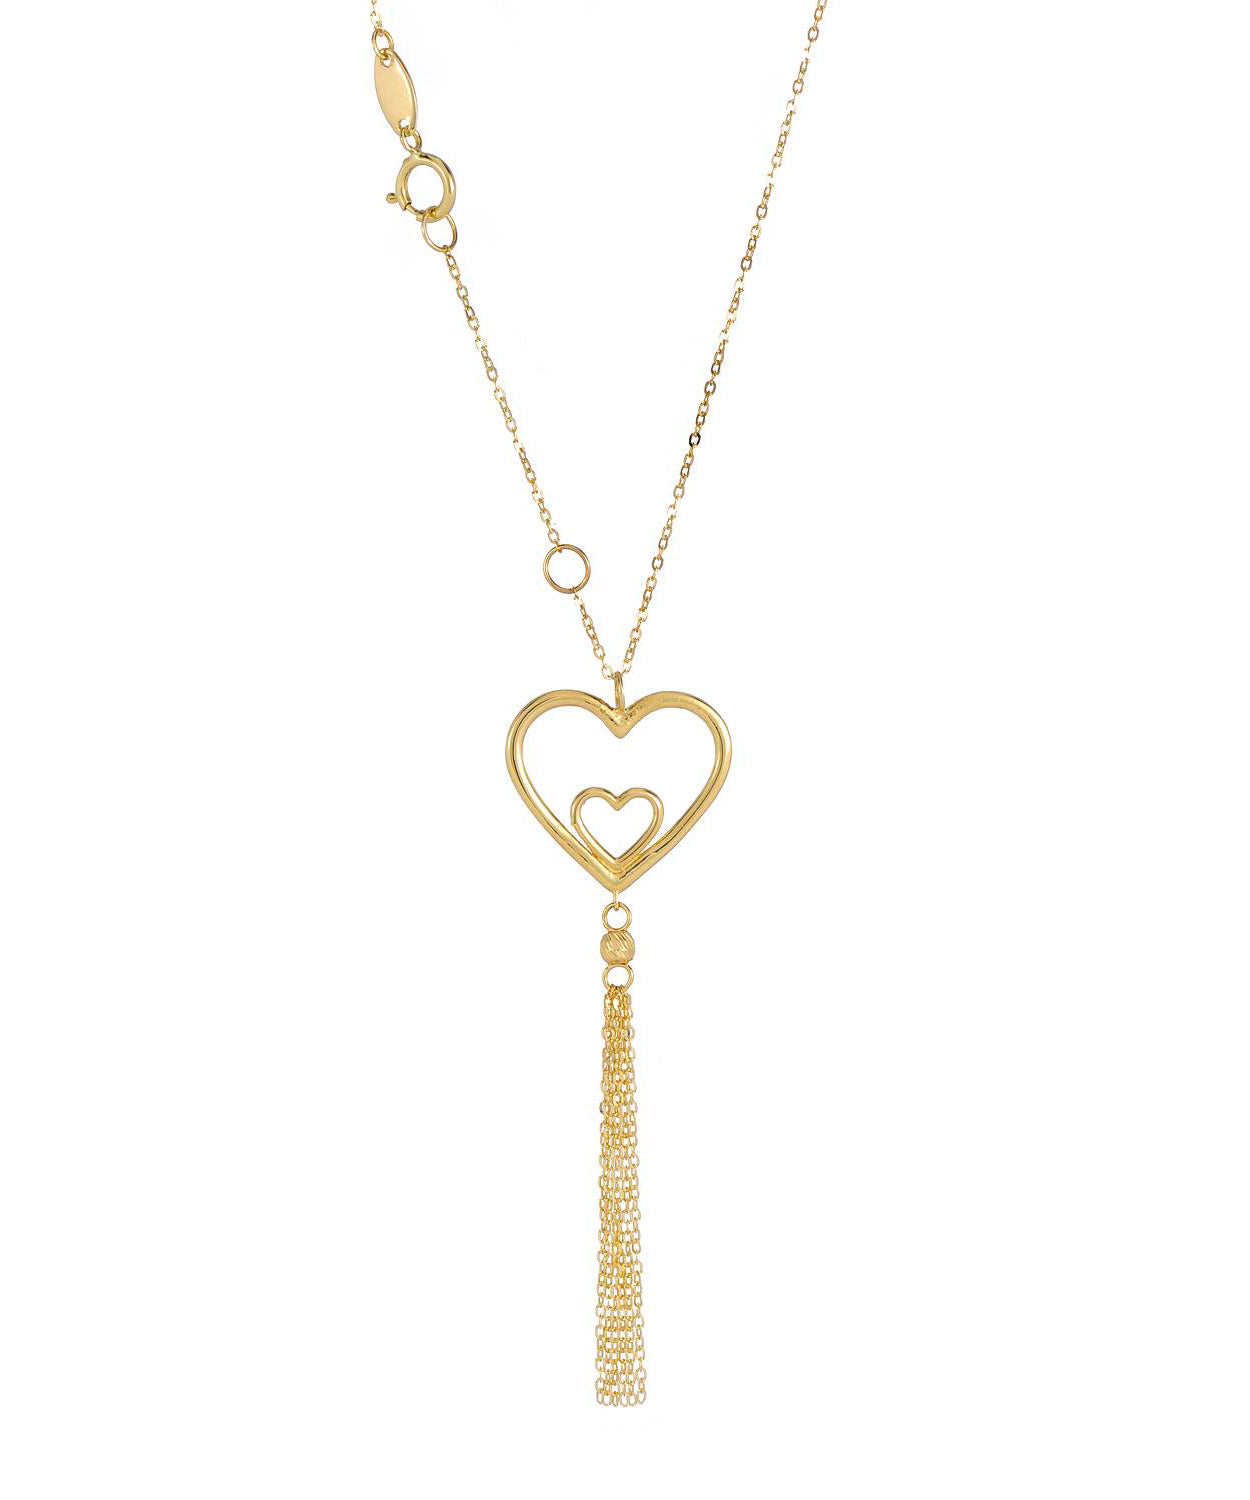 14k Gold Double Heart Pendant With Chain - Made in Italy View 2